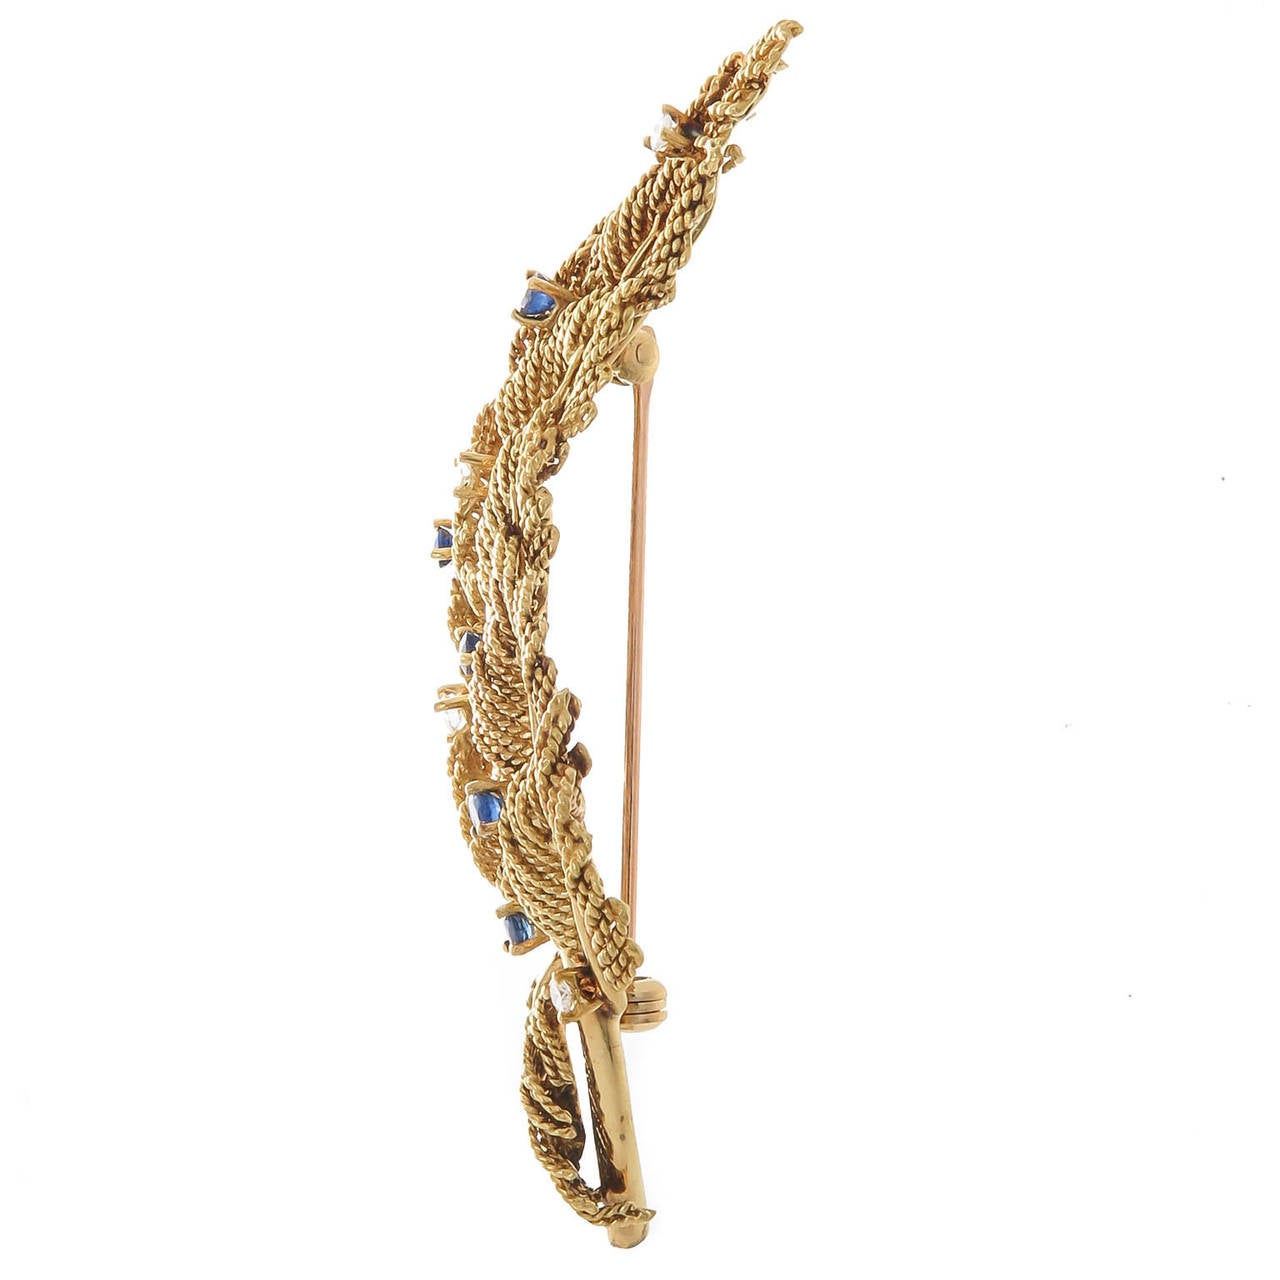 Circa 1970 Jean Schlumberger for Tiffany & Company 18K Yellow Gold Leaves brooch, detailed twisted rope leaves, accented with round Brilliant cut Diamonds and Sapphires. 3 inch total length. With original Tiffany Presentation Box.